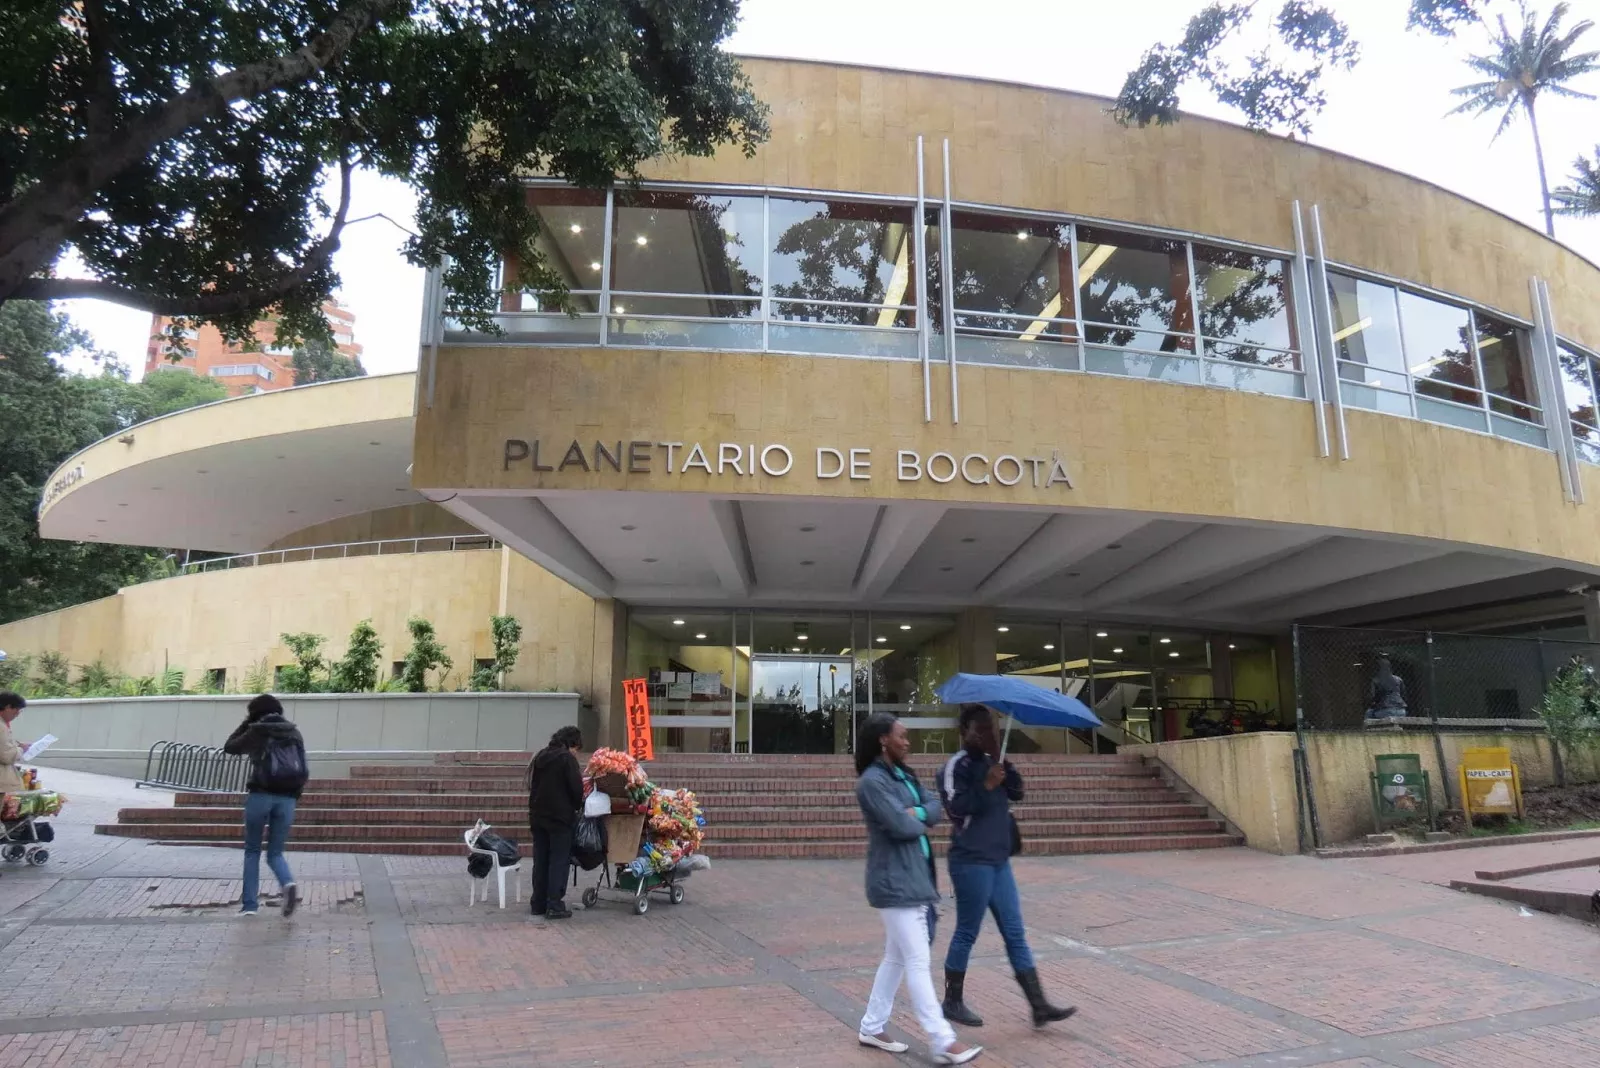 District Planetarium Bogota in Colombia, South America | Observatories & Planetariums - Rated 3.7